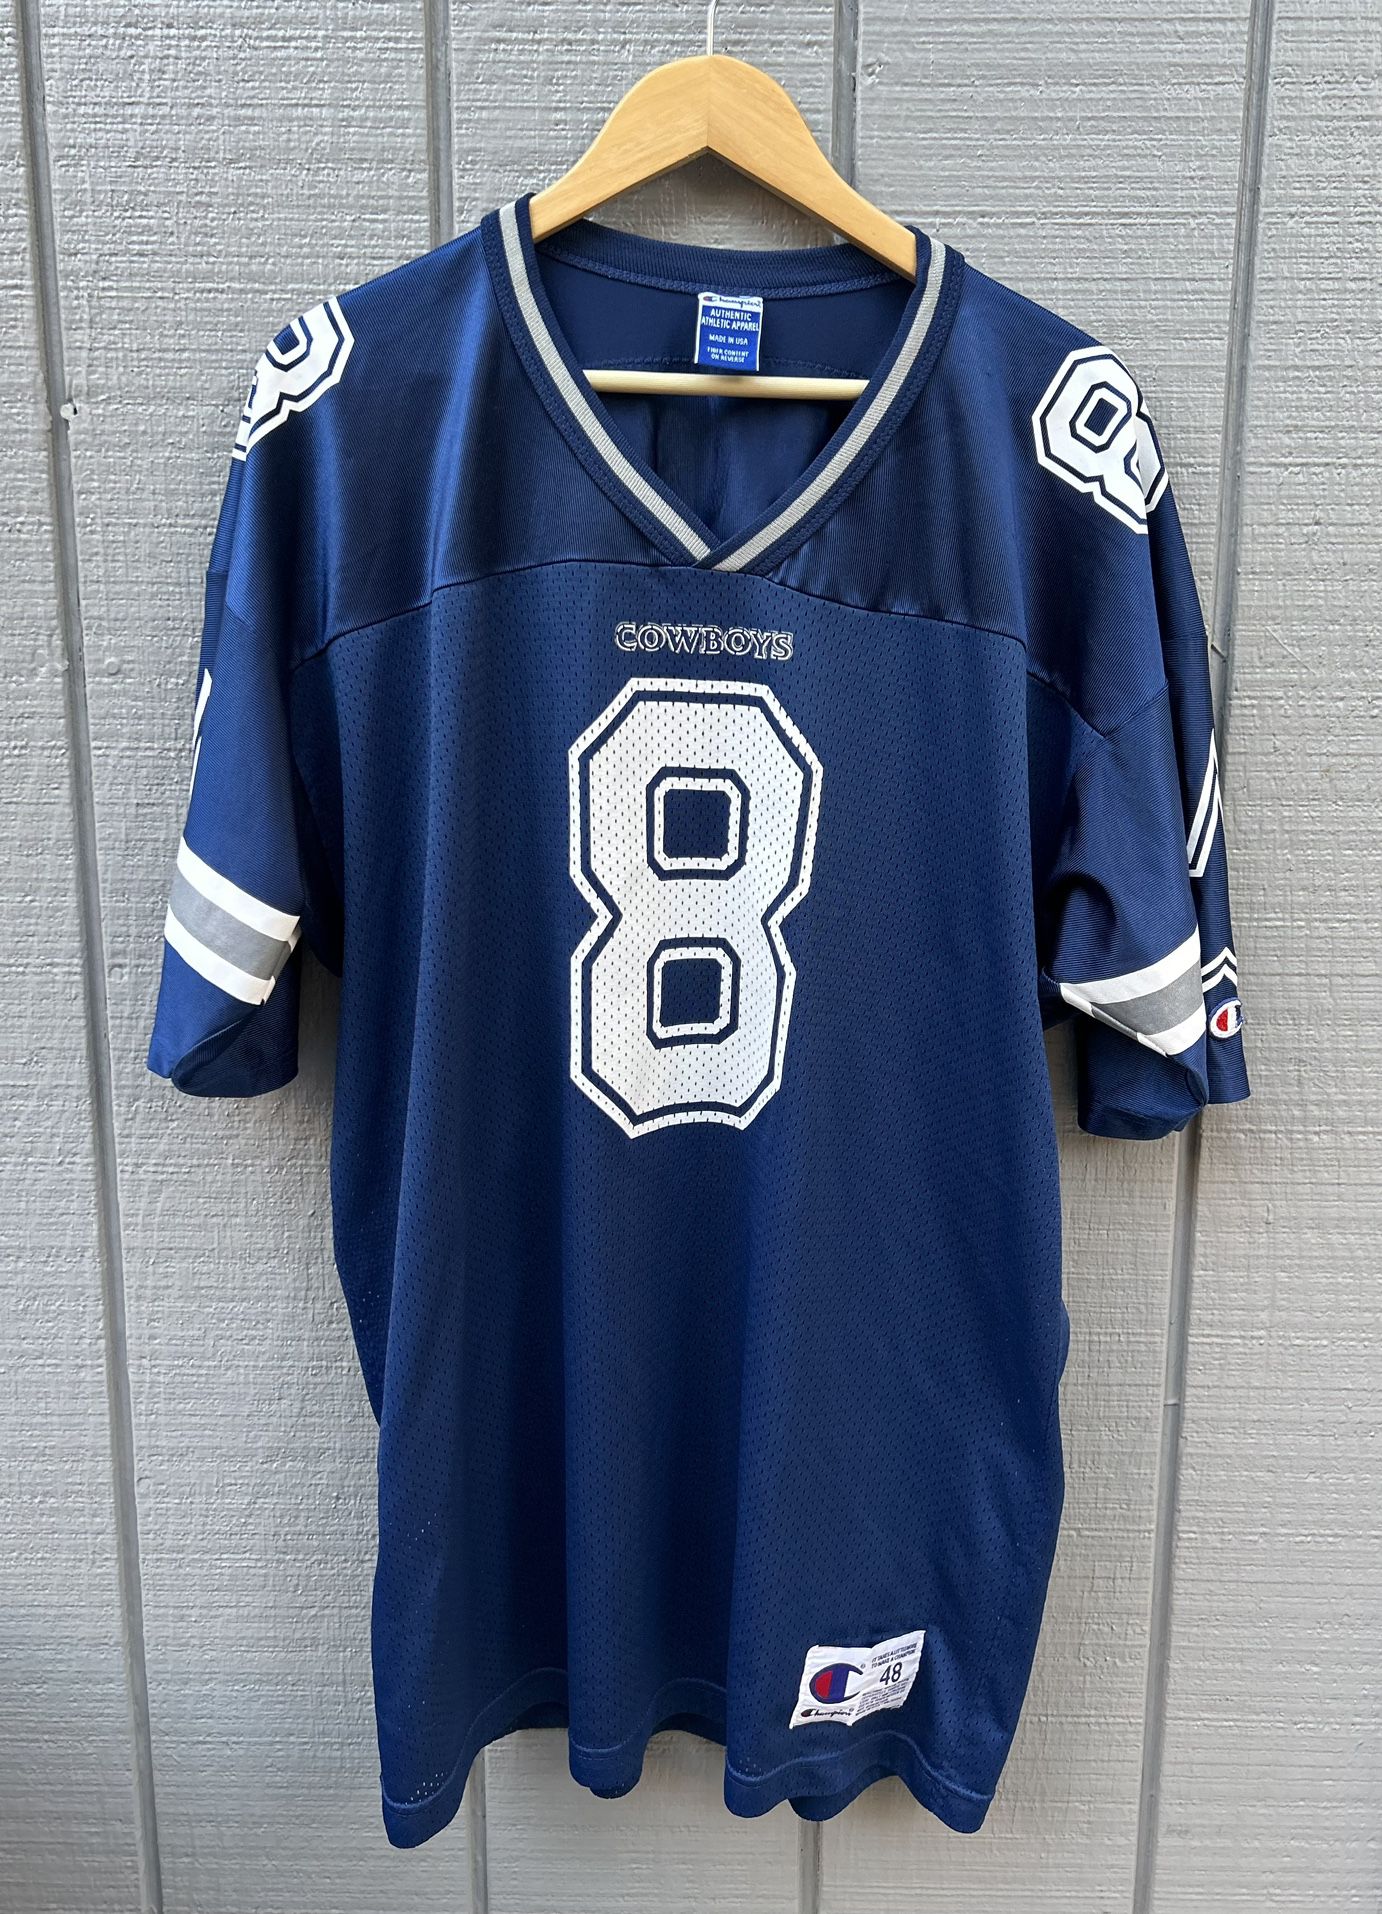 Vintage 90s Dallas Cowboys NFL Troy Aikman #8 Champion Jersey Size 48 Blue  for Sale in Roseville, CA - OfferUp